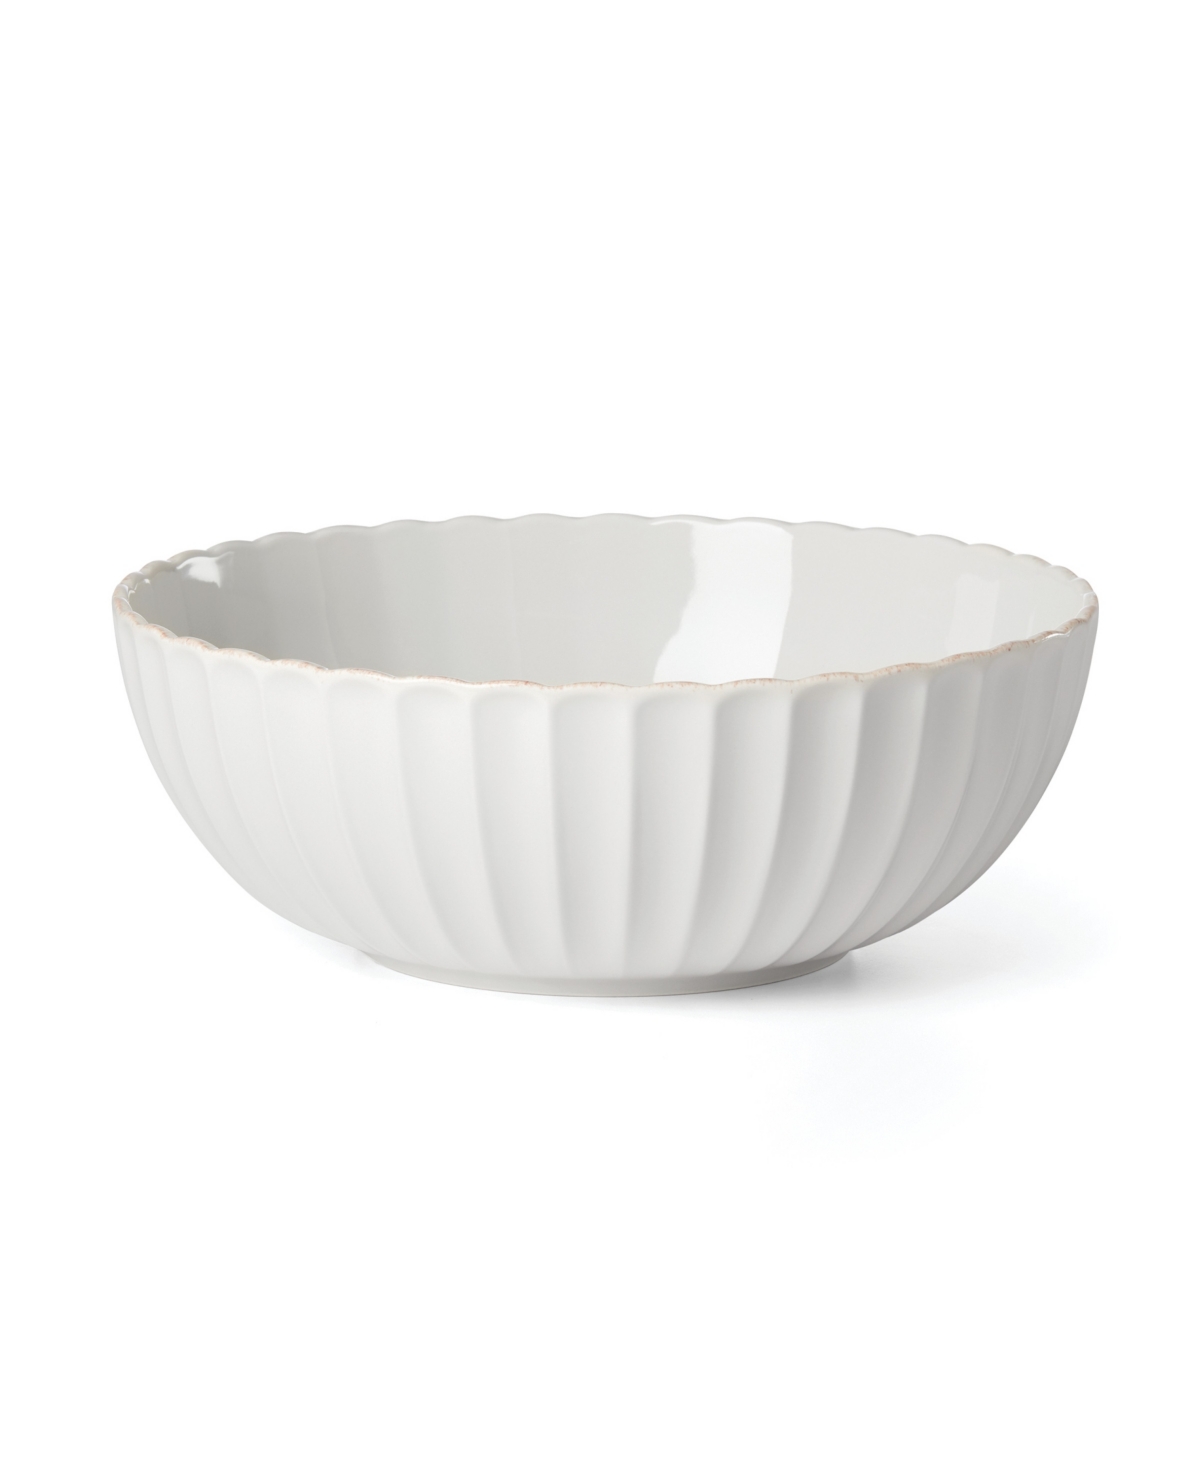 French Perle Scallop Serving Bowl